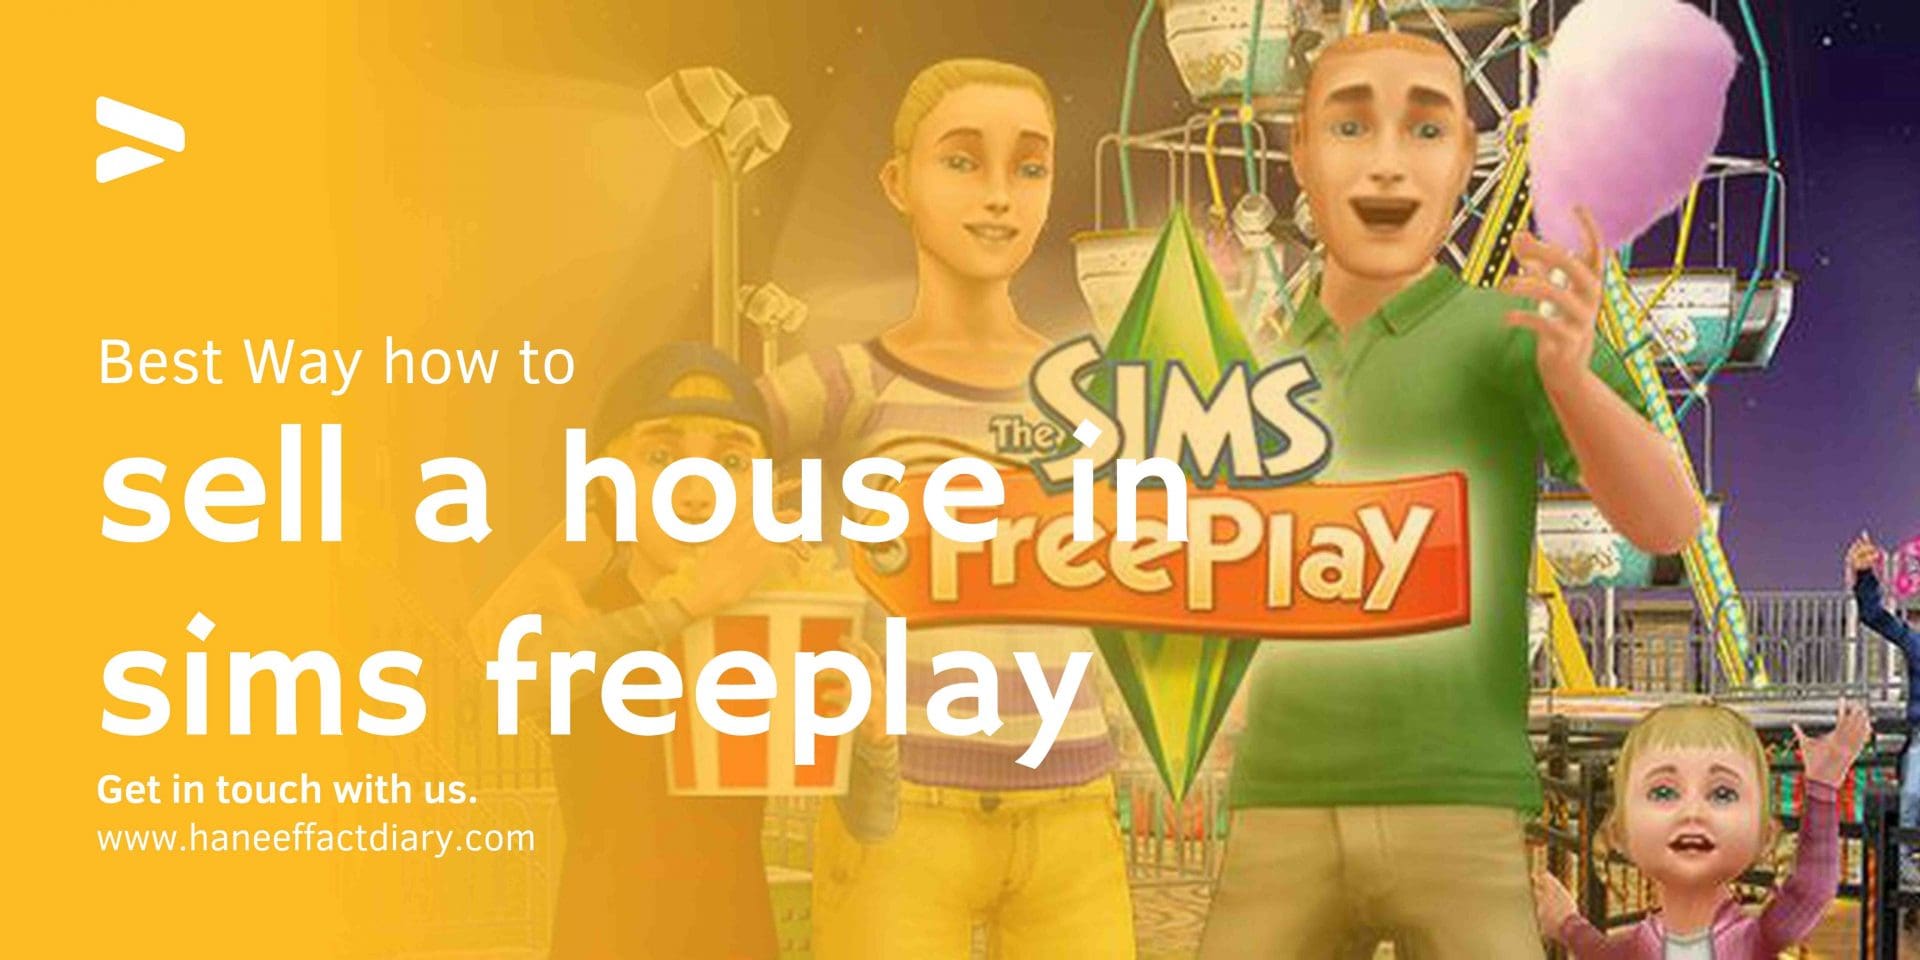 Best Way how to sell a house in sims freeplay 2022